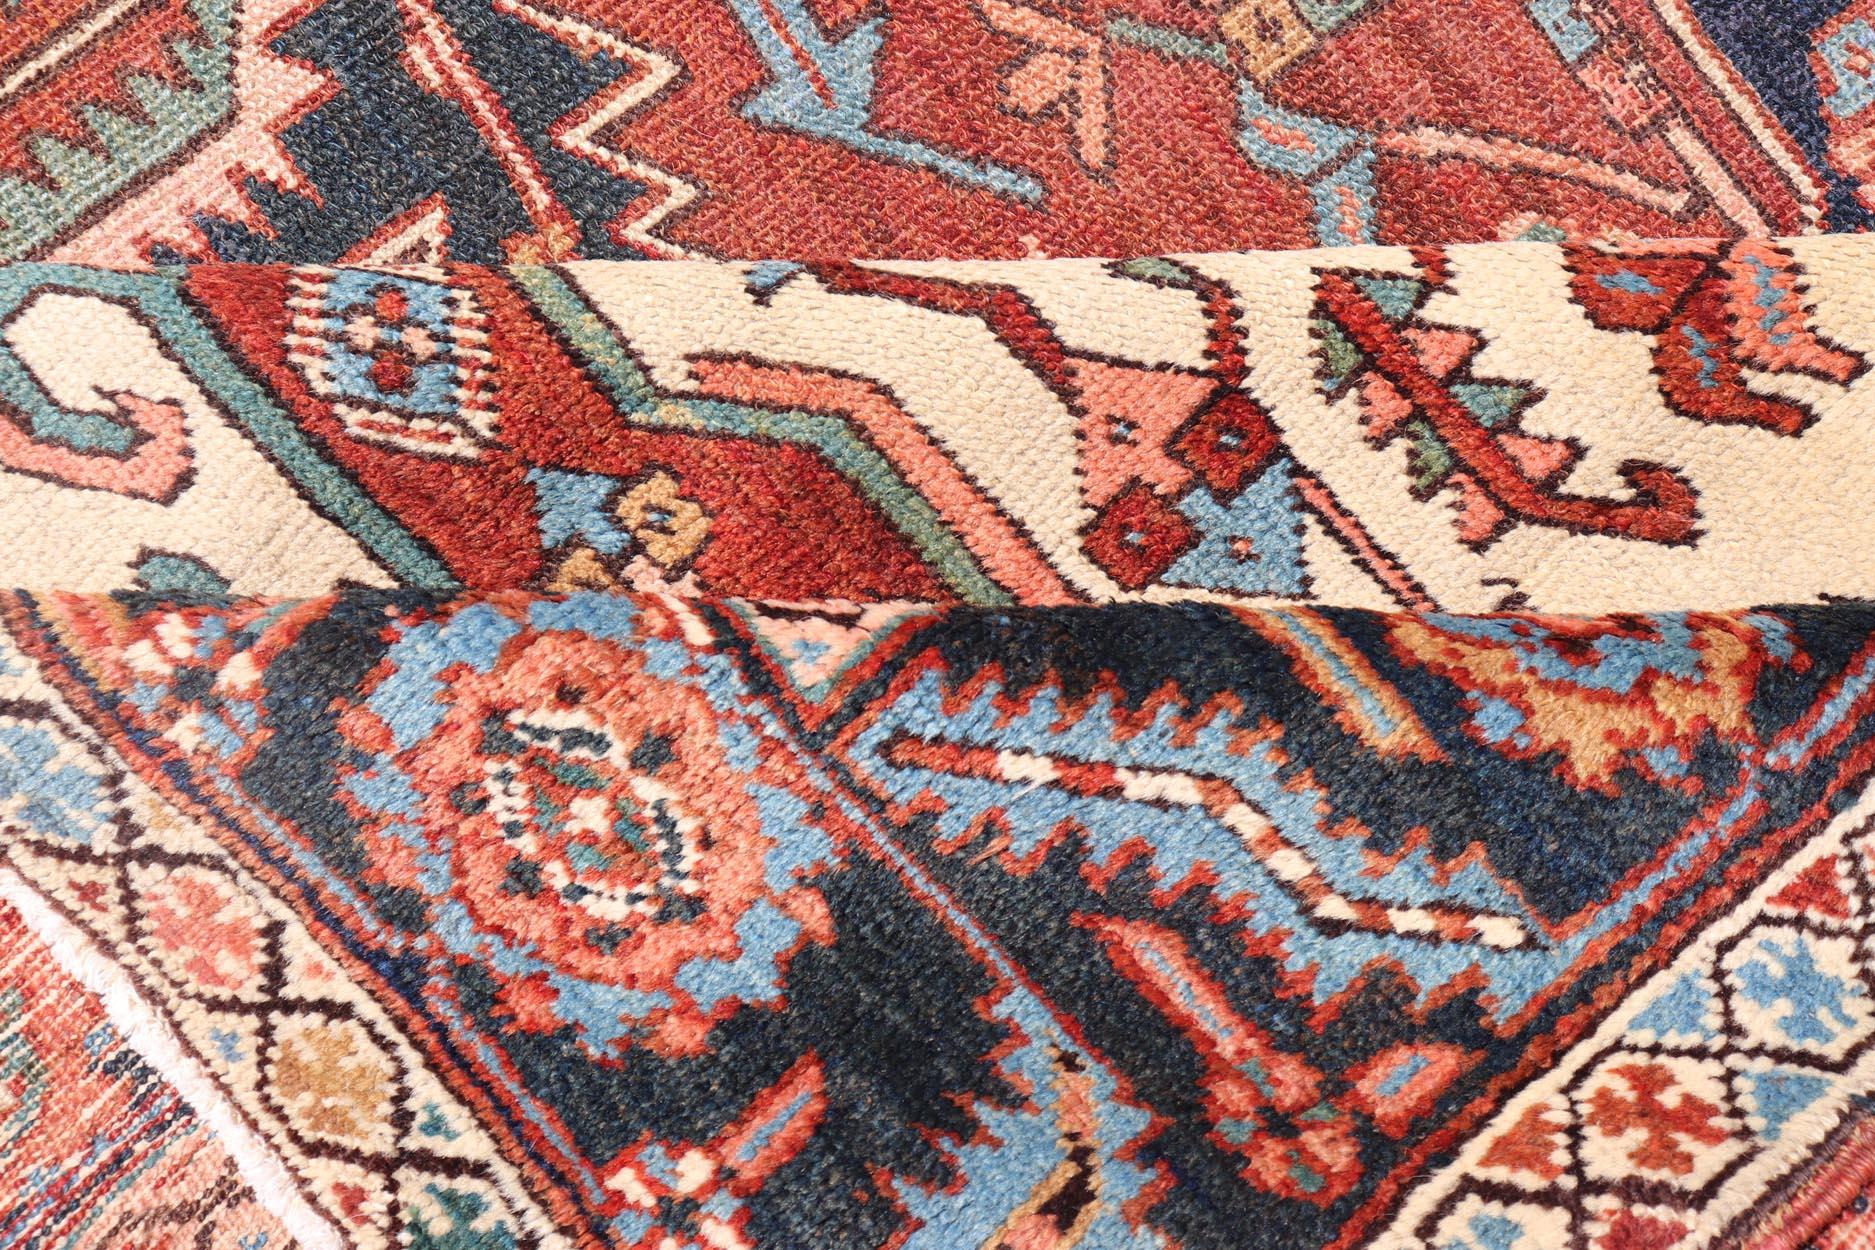 Early 20th Century Antique Persian Serapi Carpet with Stylized Geometric Motifs For Sale 8